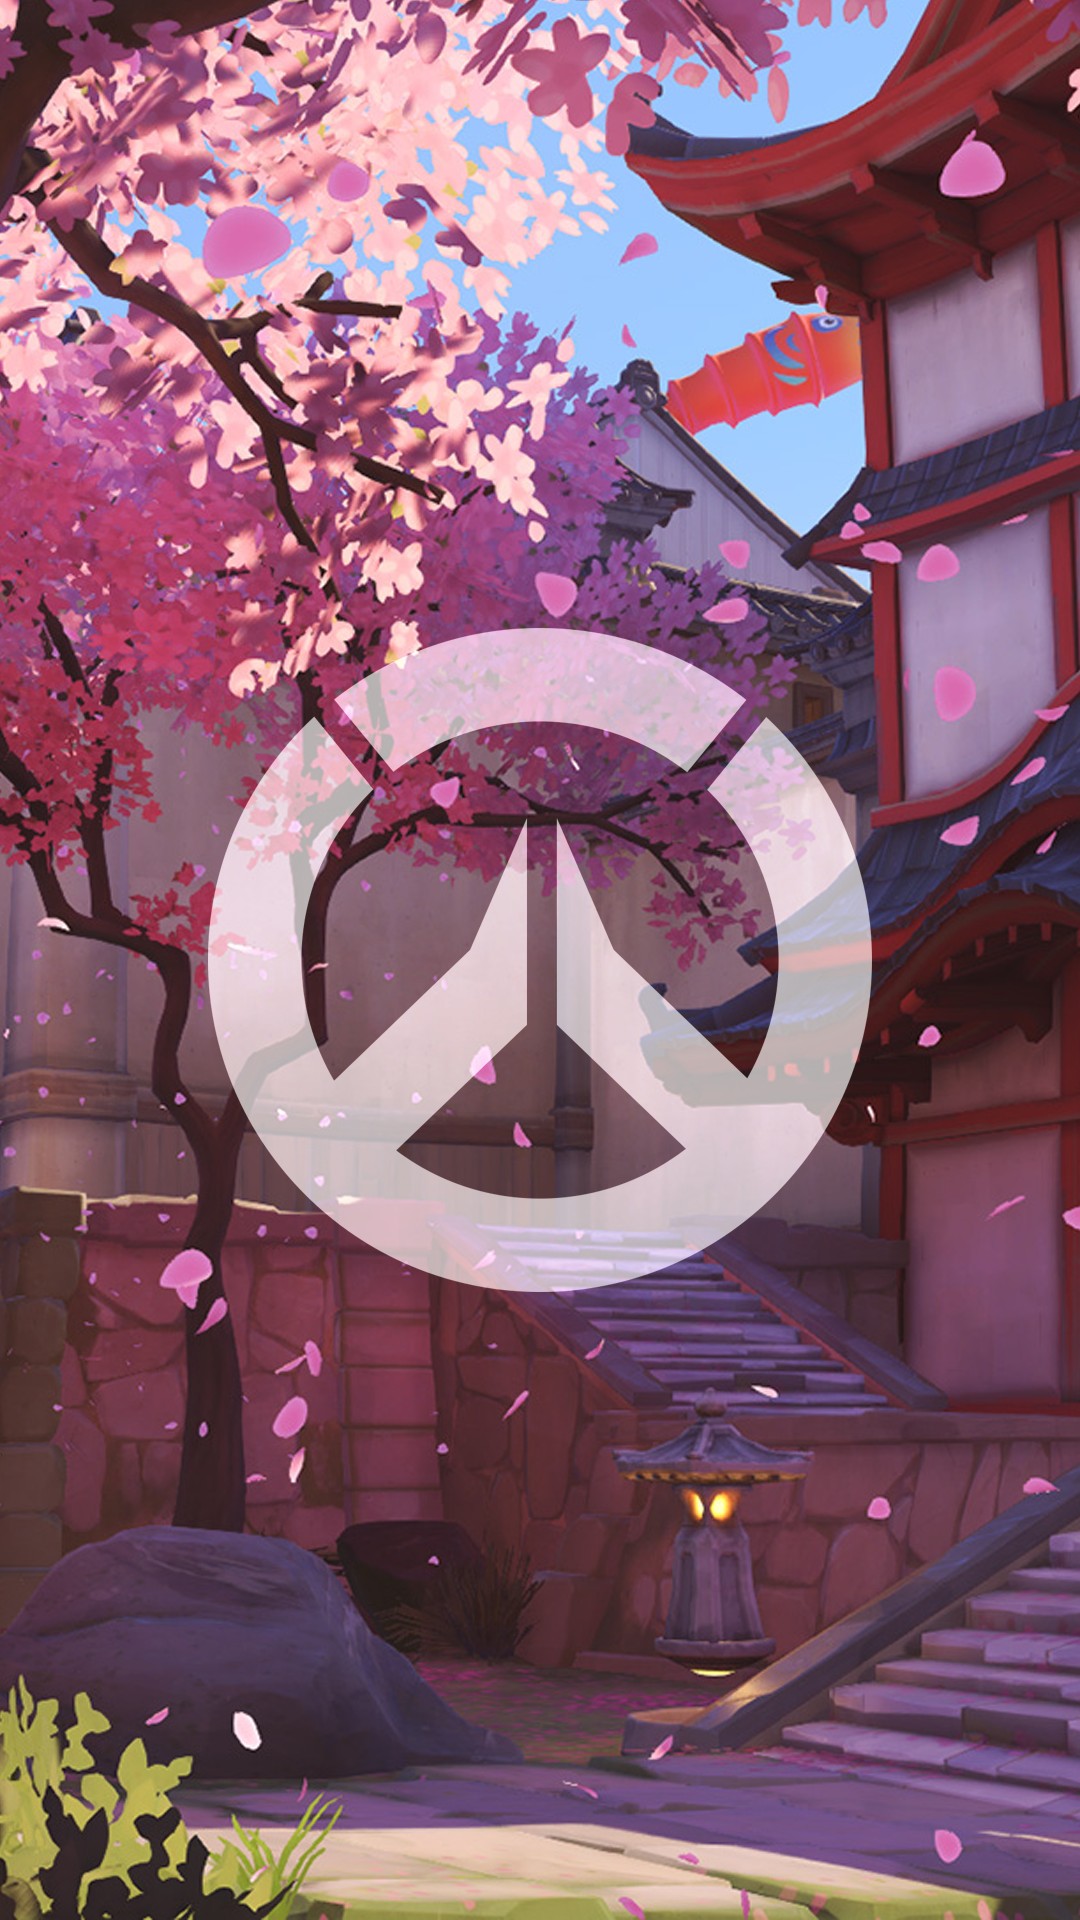 Overwatch mobile wallpaper ·① Download free stunning full HD